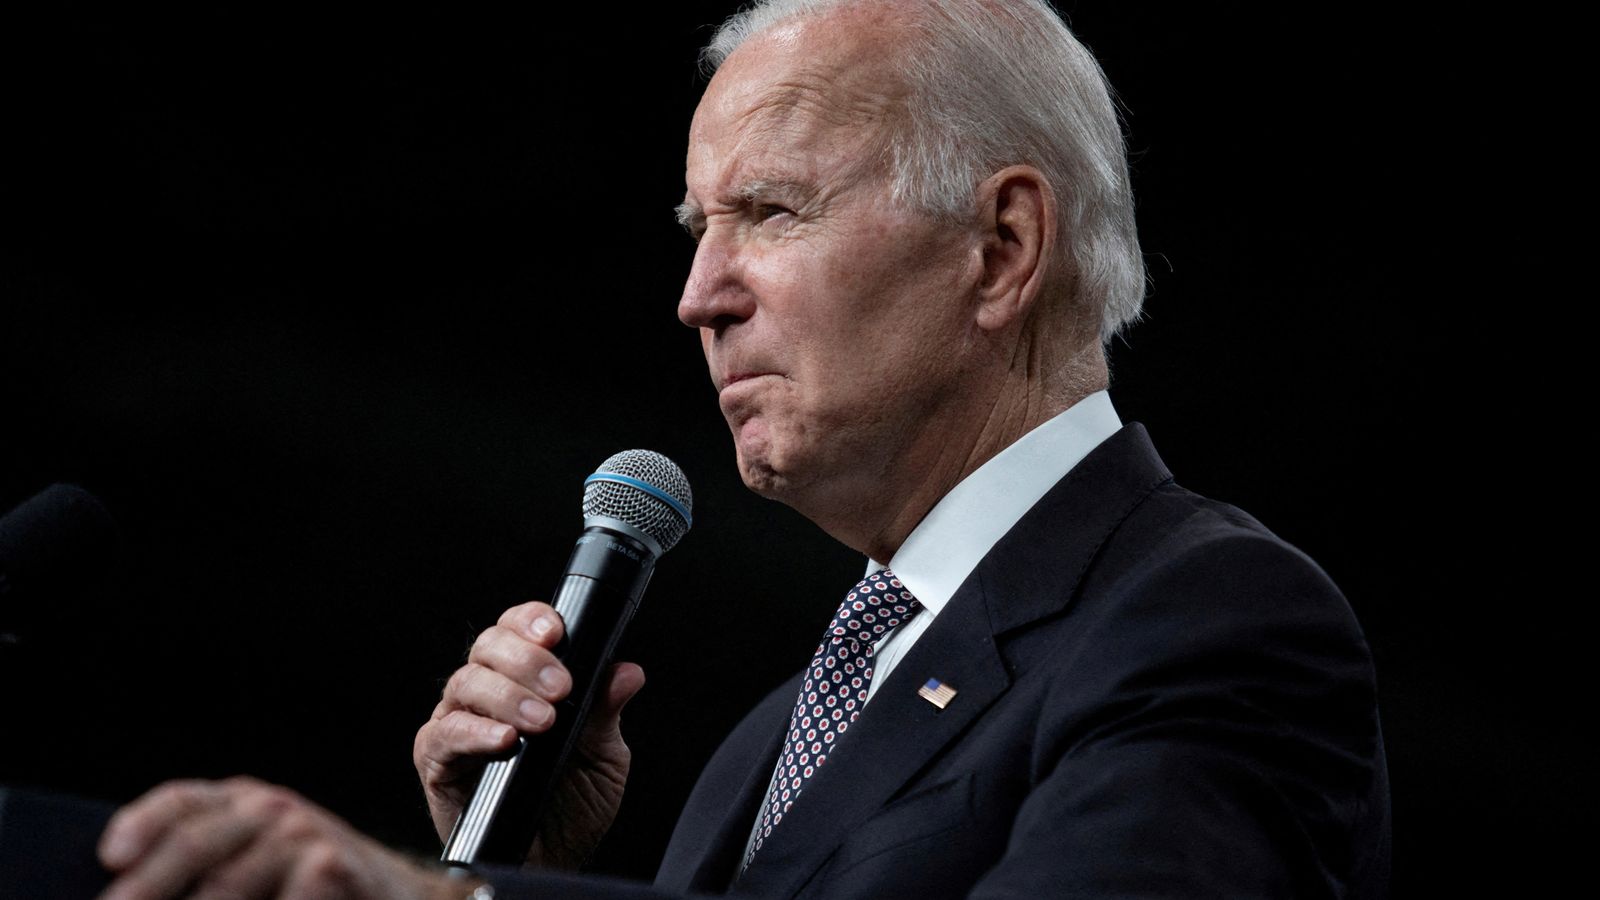 Ukraine war: 'First time since the Cuban missile crisis, we have a direct threat of the use nuclear weapons', says President Biden